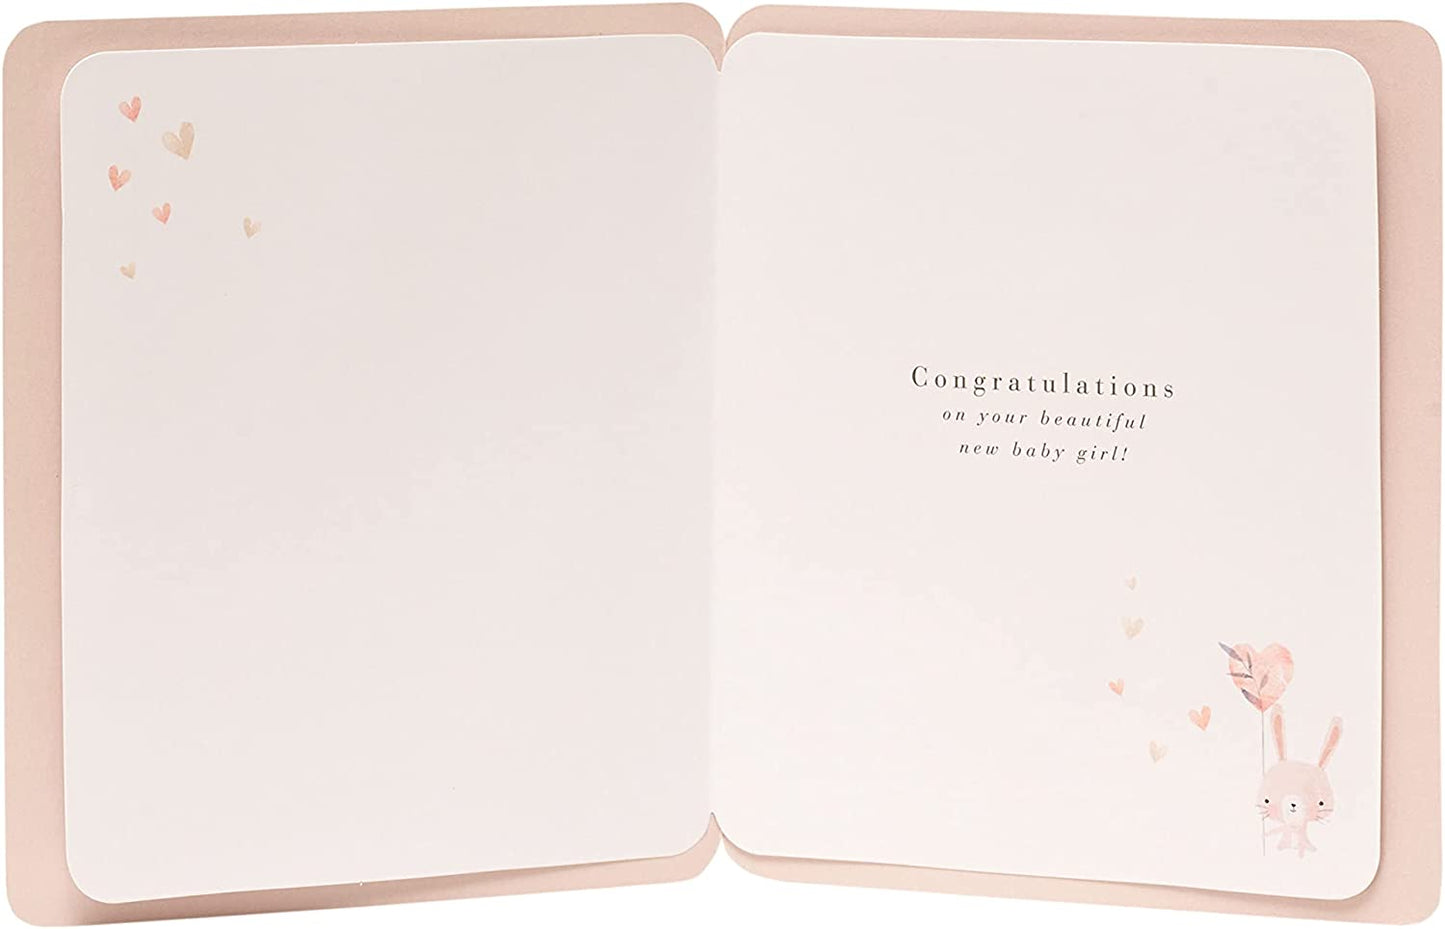 Welcome Little One New Birth Baby Girl Congratulations Card